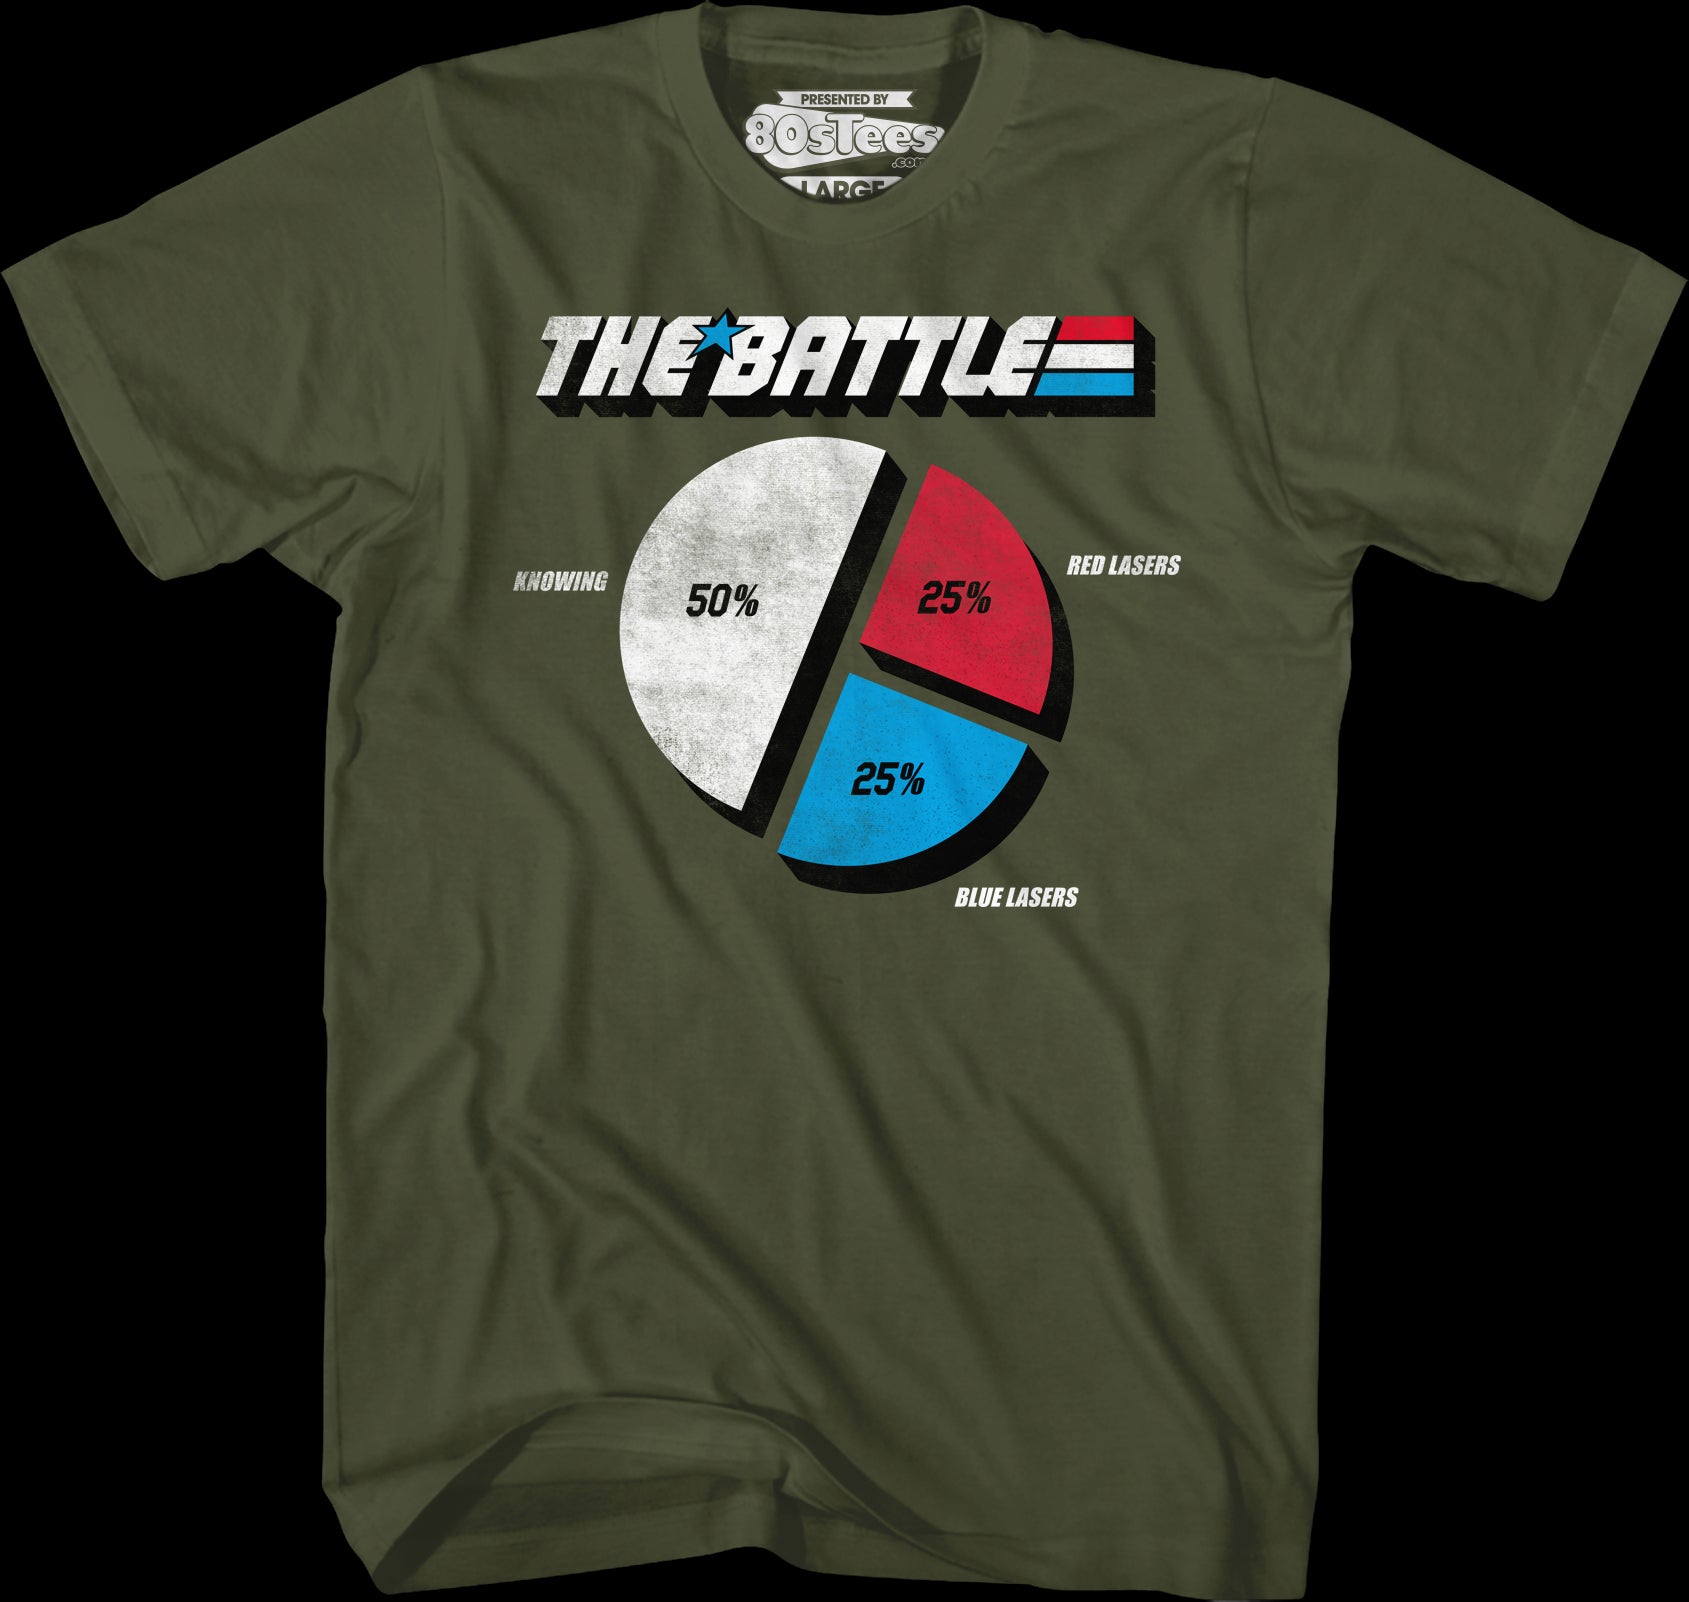 Captain America T-Shirts - Officially Licensed Movie and Comic Tees